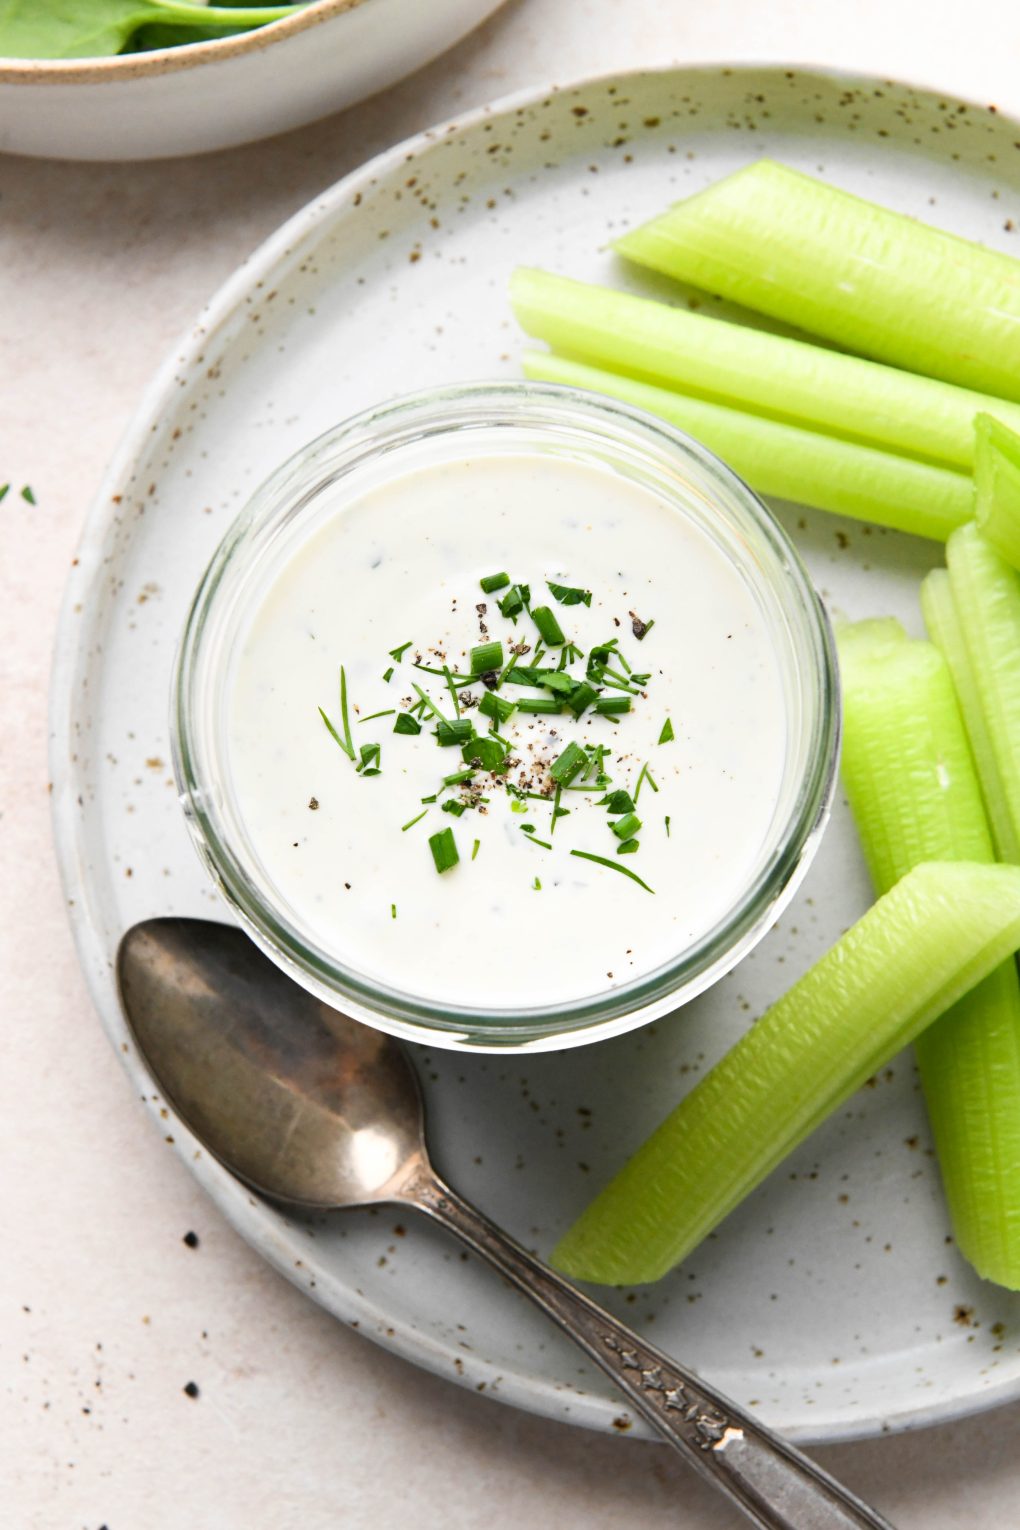 Dairy free ranch dressing in a small glass jar next to celery sticks and a spoon. On a cream colored background.